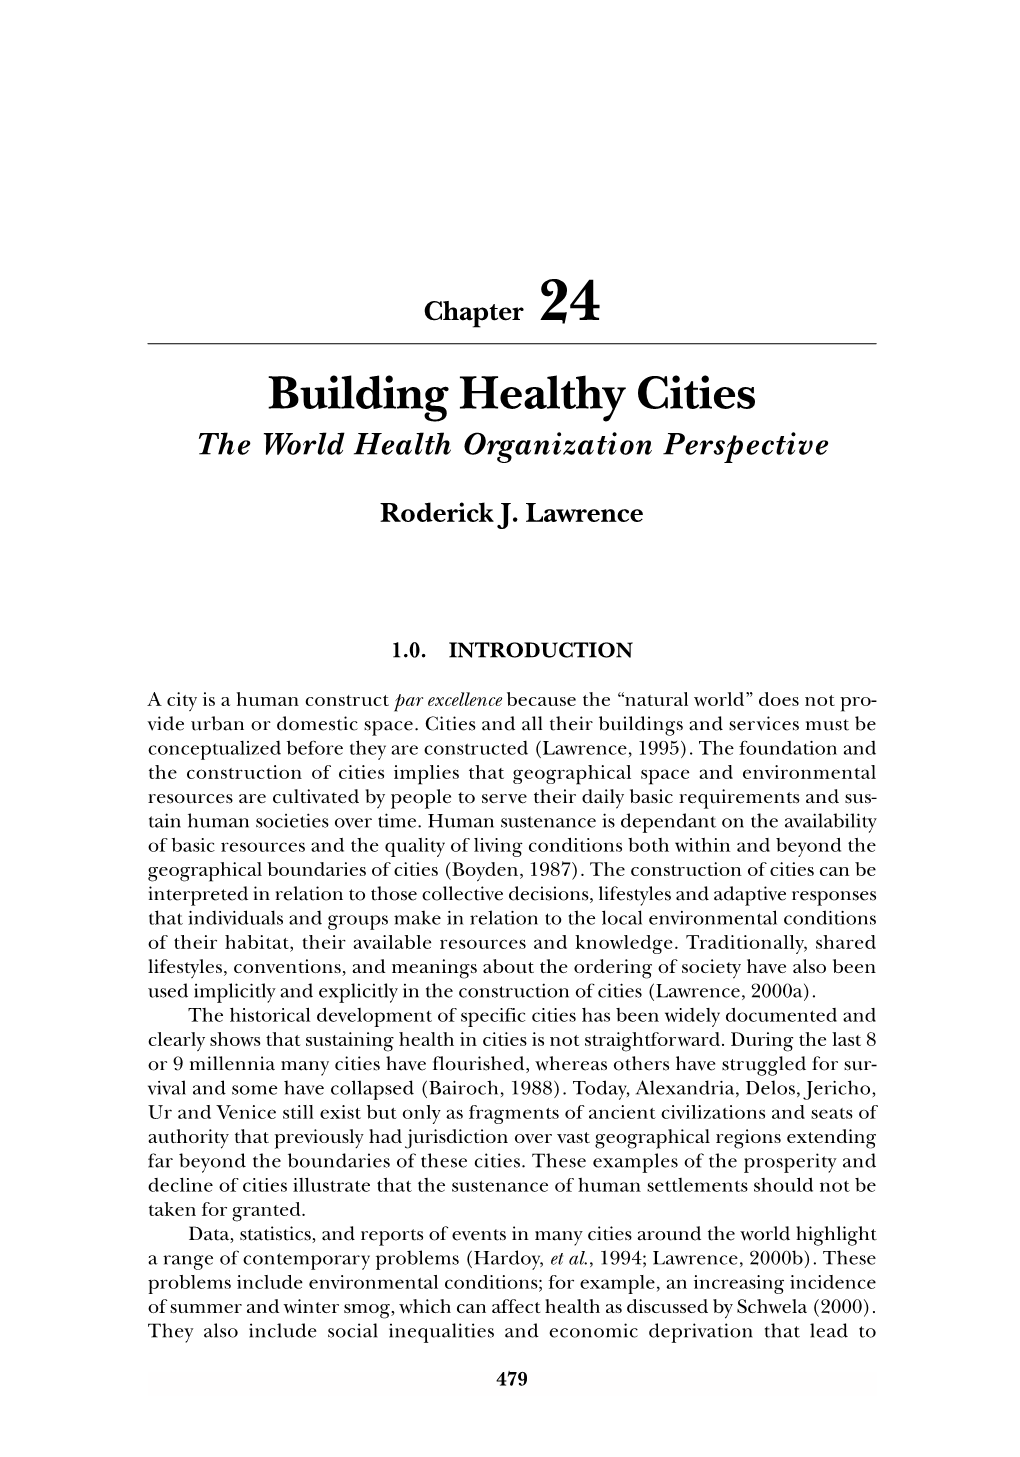 Building Healthy Cities the World Health Organization Perspective